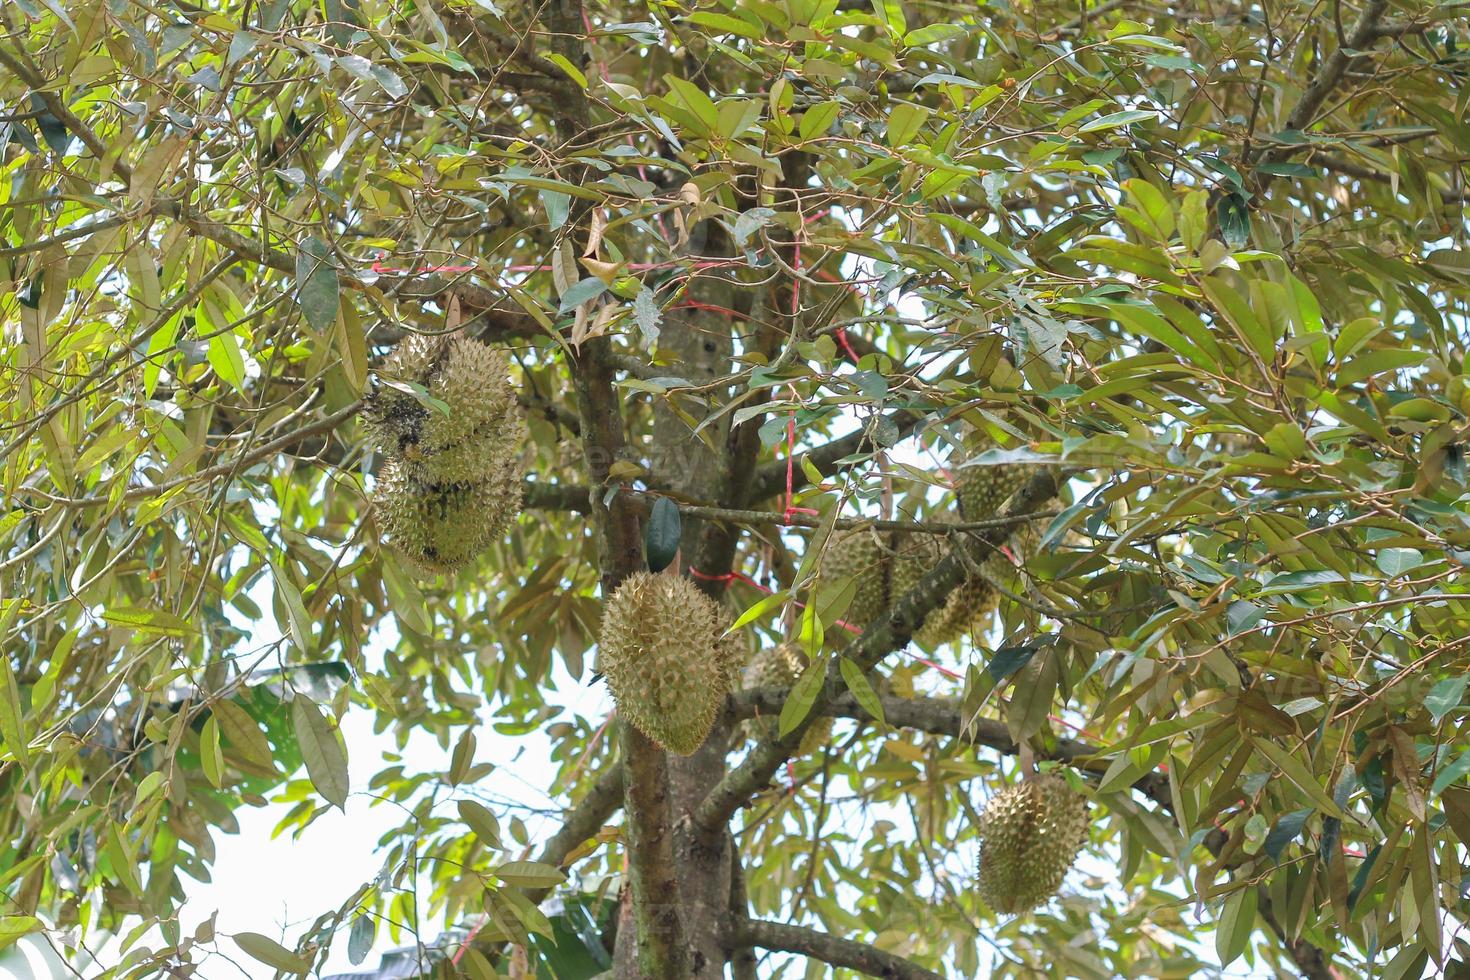 durians on the durian tree in an organic durian orchard. photo